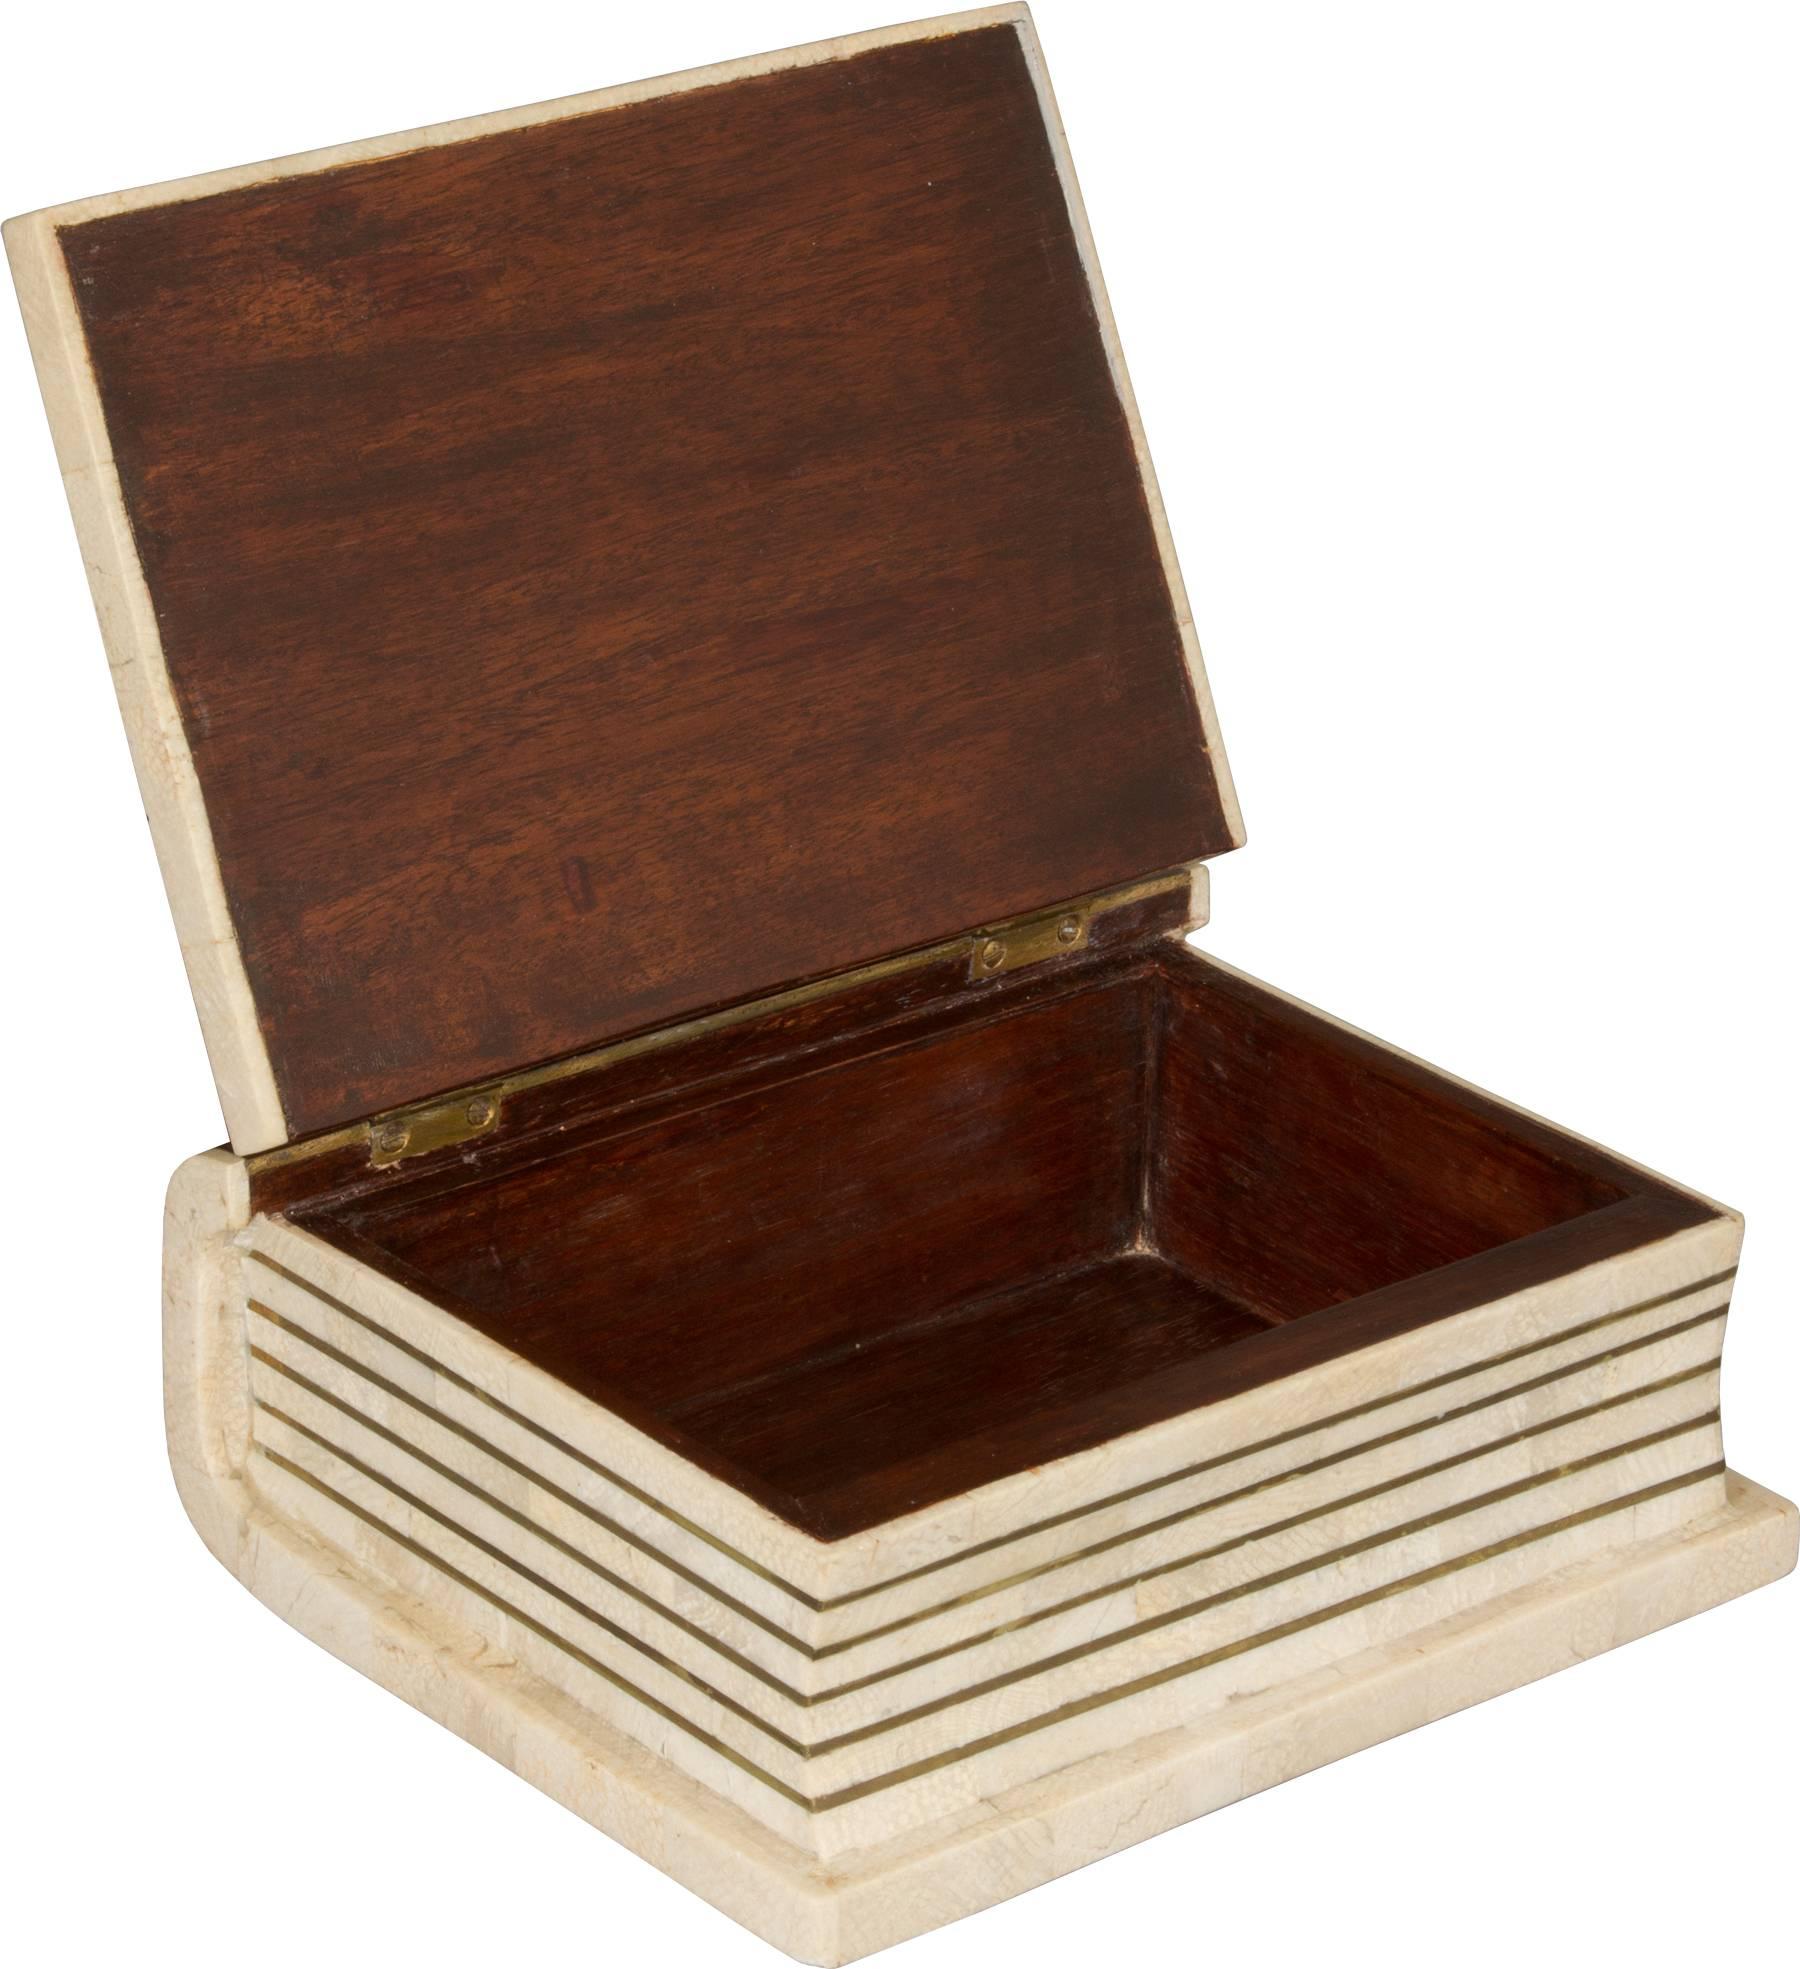 This is a tessellated stone box with brass detailing and a wood interior liner.